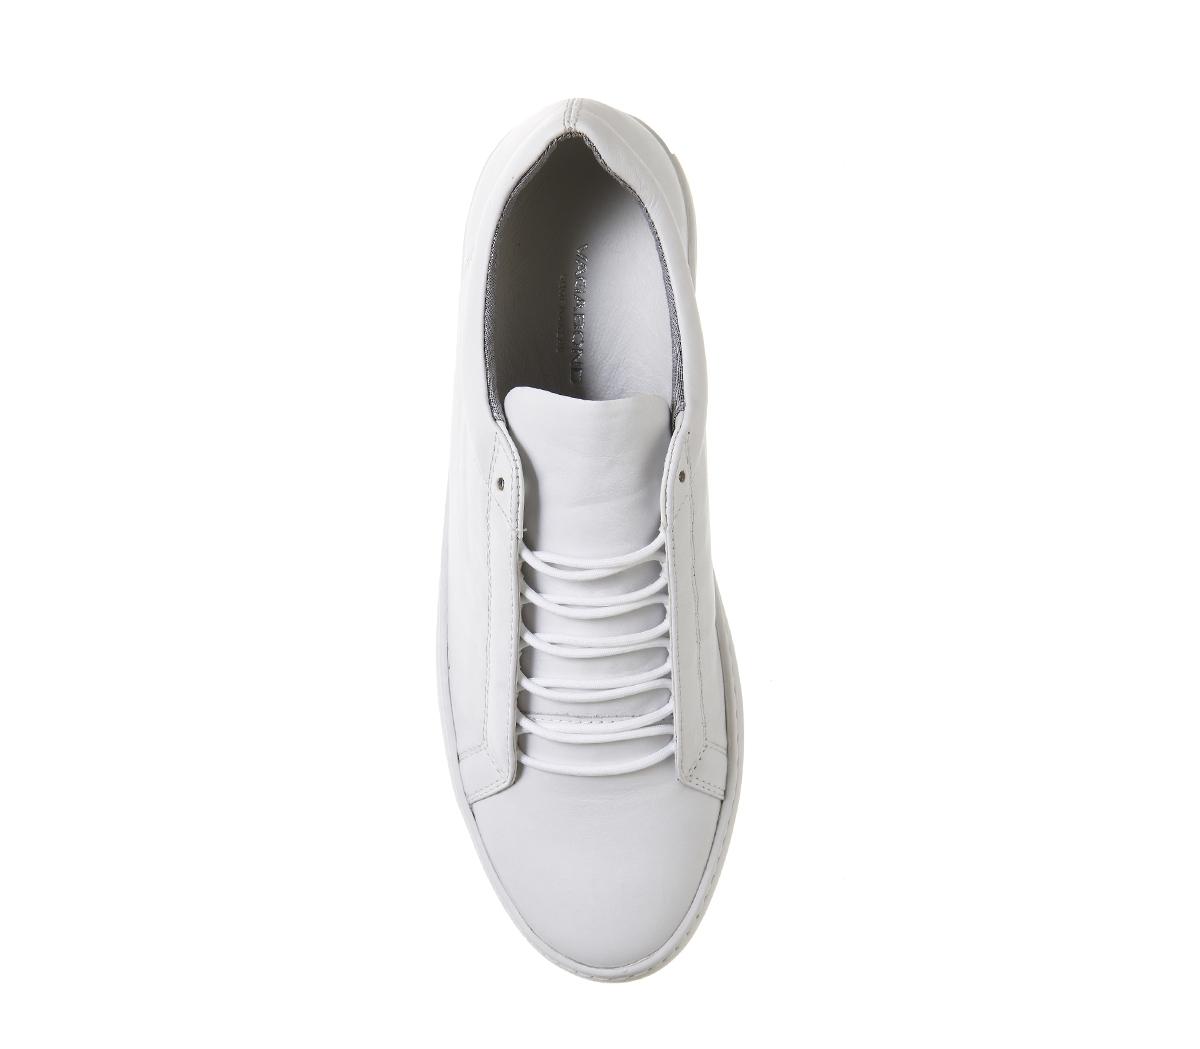 Vagabond Shoemakers Zoe Lace Sneaker White Leather - Flat Shoes for Women